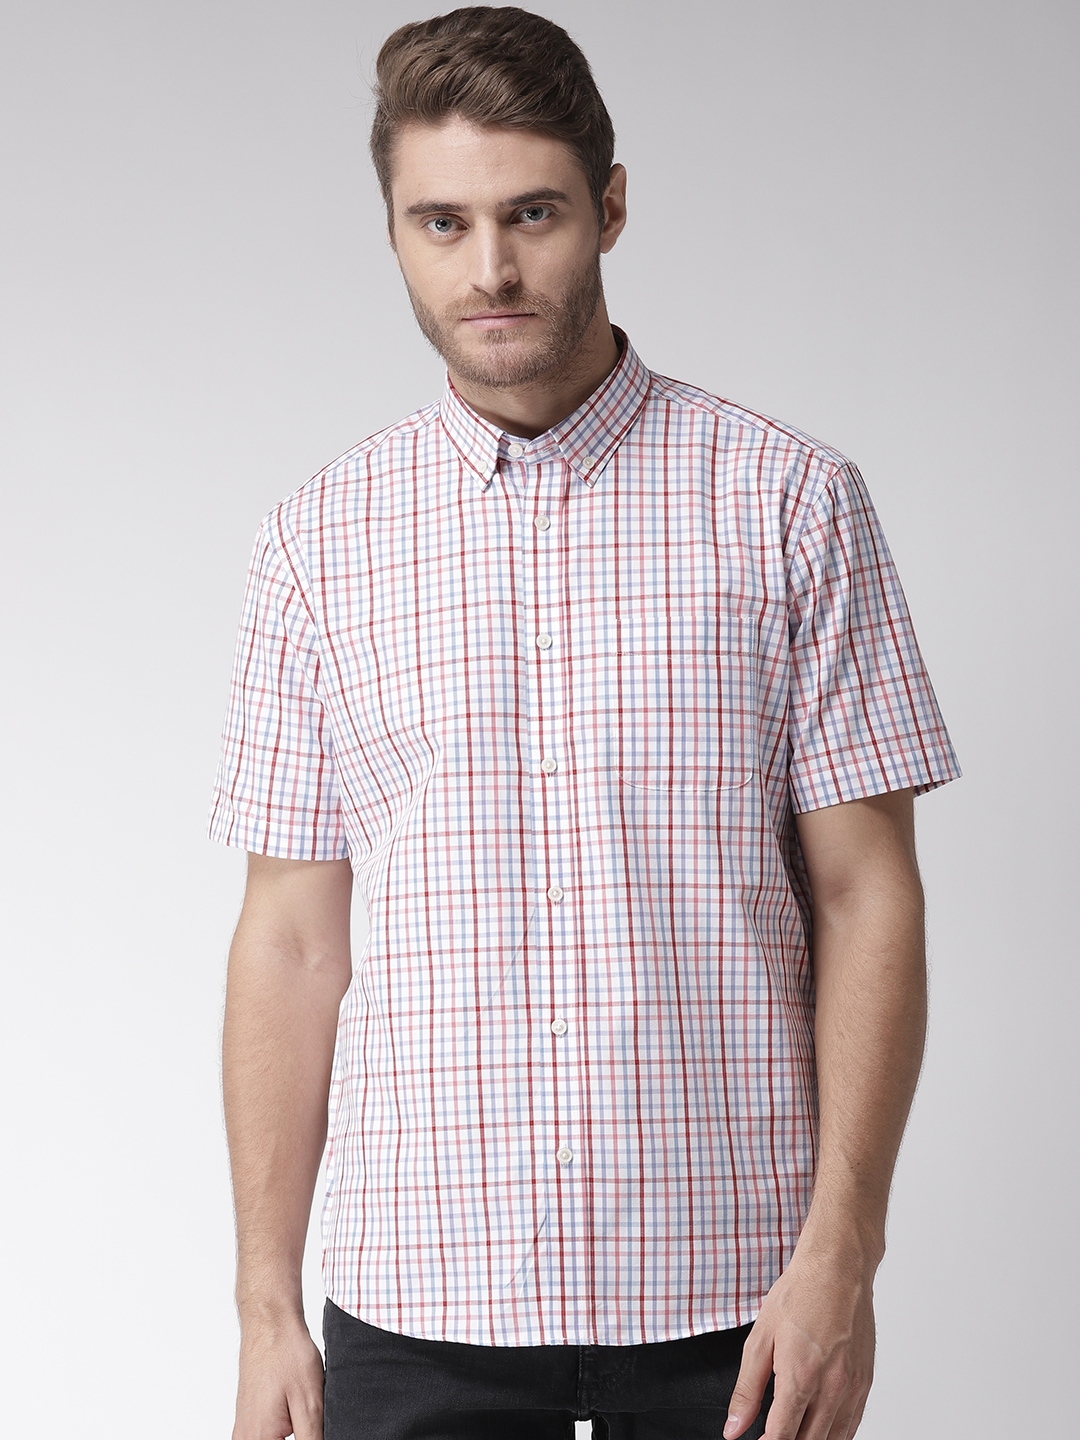 Buy Marks & Spencer Men White & Red Relaxed Regular Fit Printed Casual ...